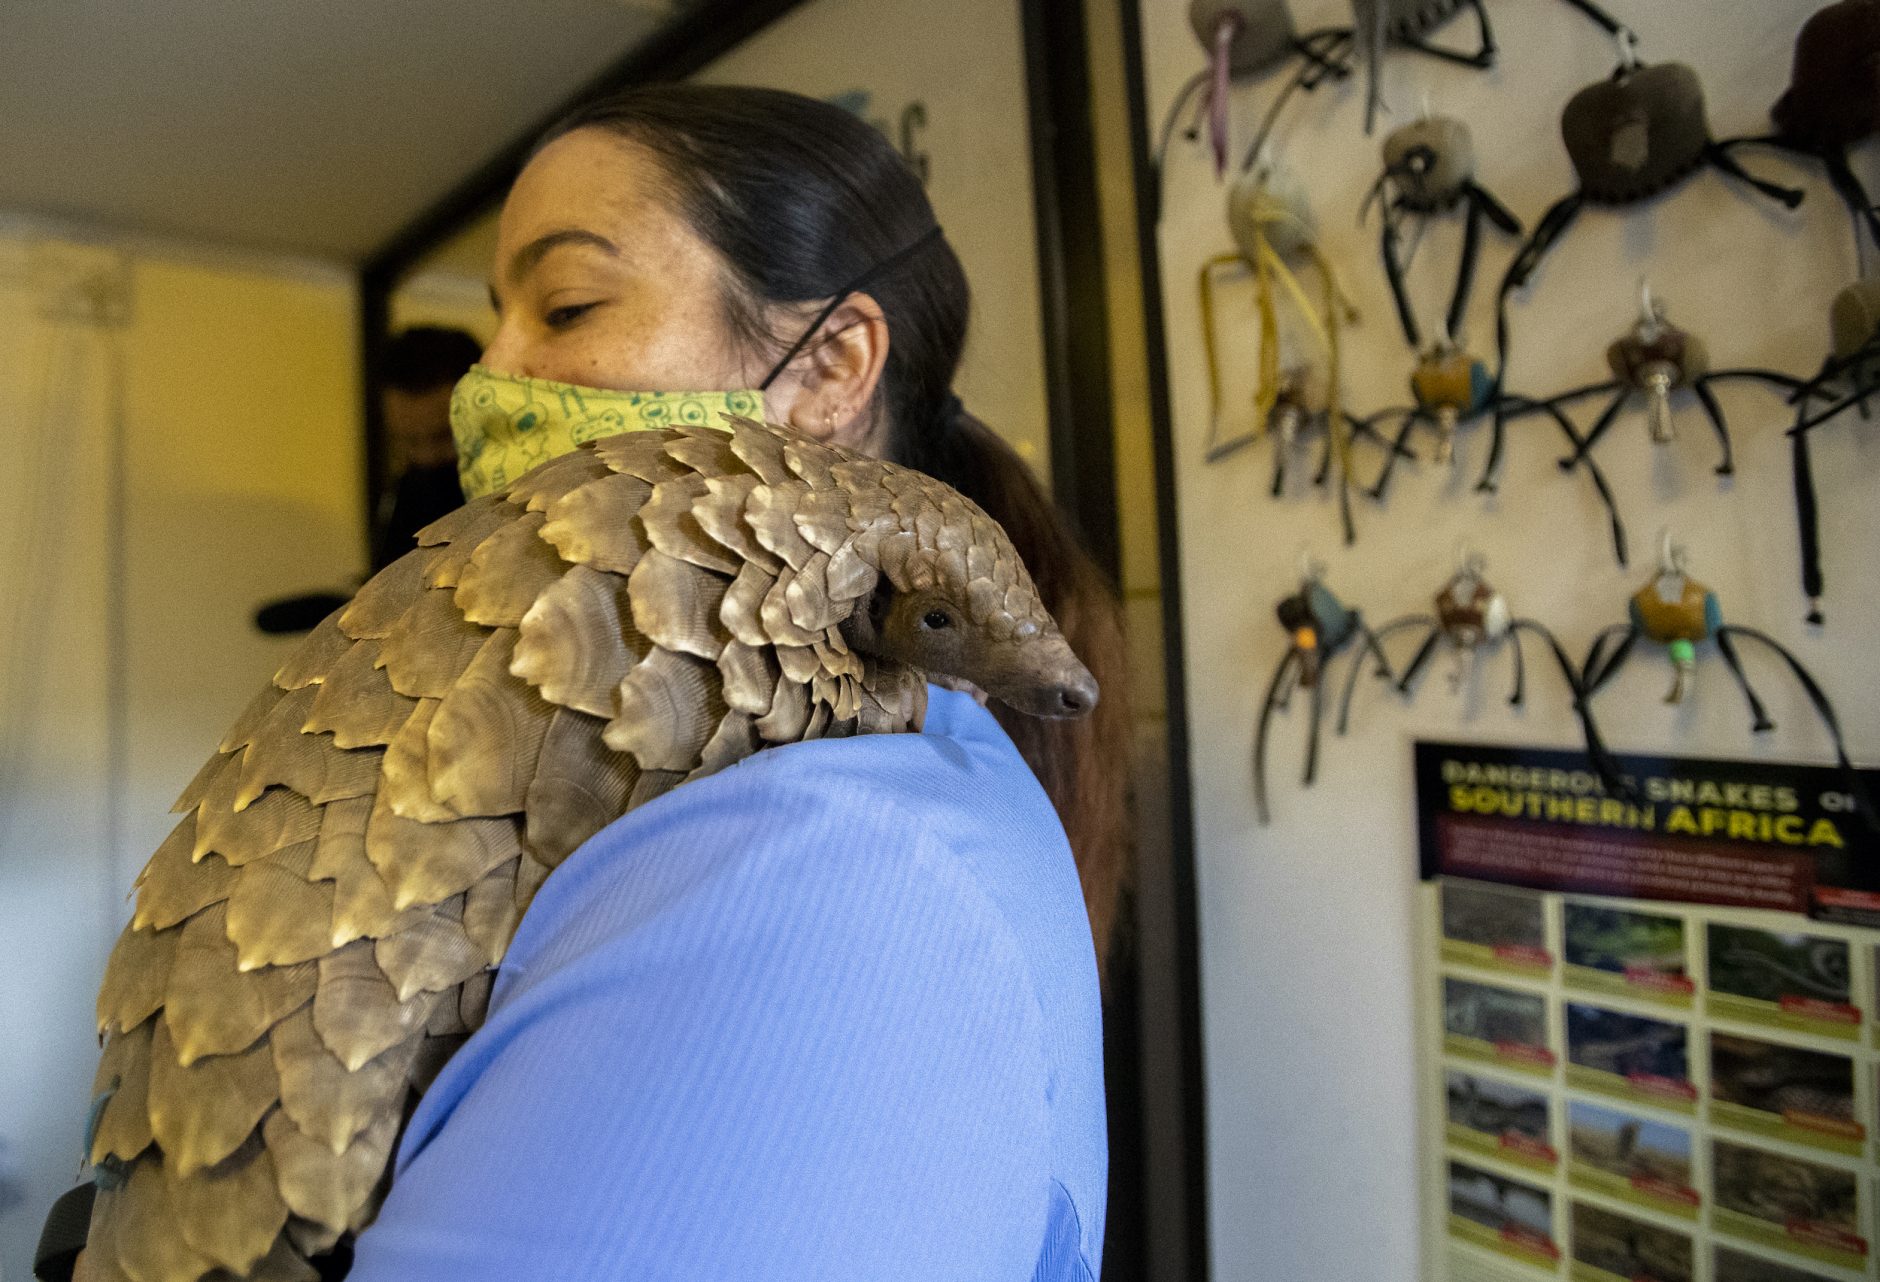 South Africa One Good Thing-Pangolin Clinic | Courthouse News Service